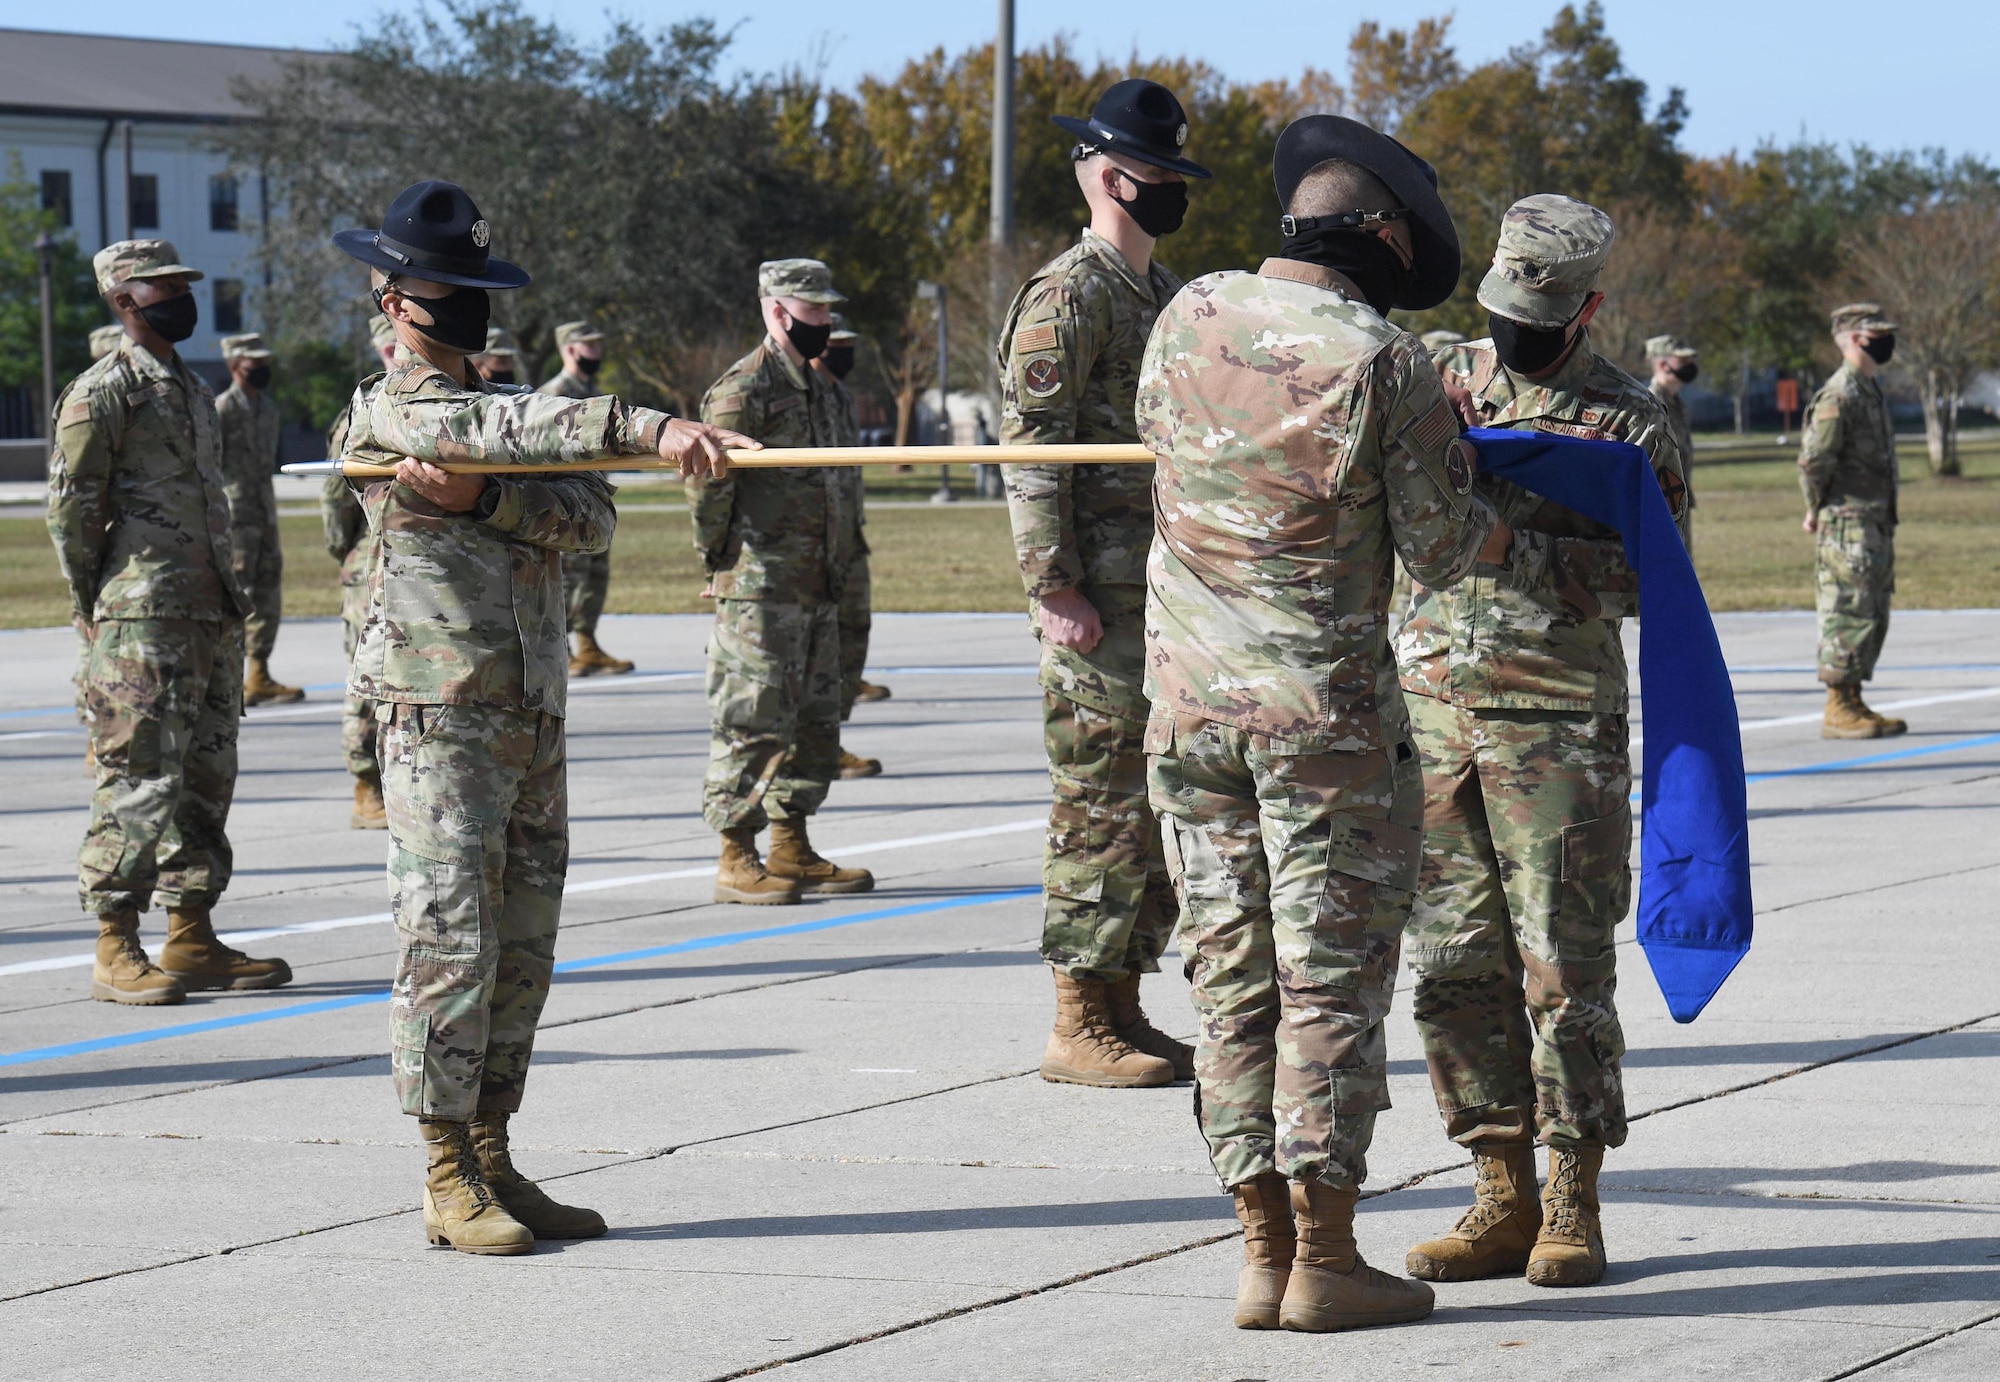 U.S. Air Force Tech. Sgt. Isaiah Smith, 37th Training Wing Detachment 5 military training instructor, and Lt. Col. Benjamin Werner, 737th Training Group Detachment 5 commander, deactivate the 737th TRG Detachment 5 flag during the final BMT graduation ceremony on the Levitow Training Support Facility drill pad at Keesler Air Force Base, Mississippi, Nov. 6, 2020. Nearly 60 trainees from the 37th TRW Detachment 5 completed the six-week BMT course. Throughout the duration of BMT training at Keesler, 18 flights and 939 Airmen graduated. (U.S. Air Force photo by Kemberly Groue)